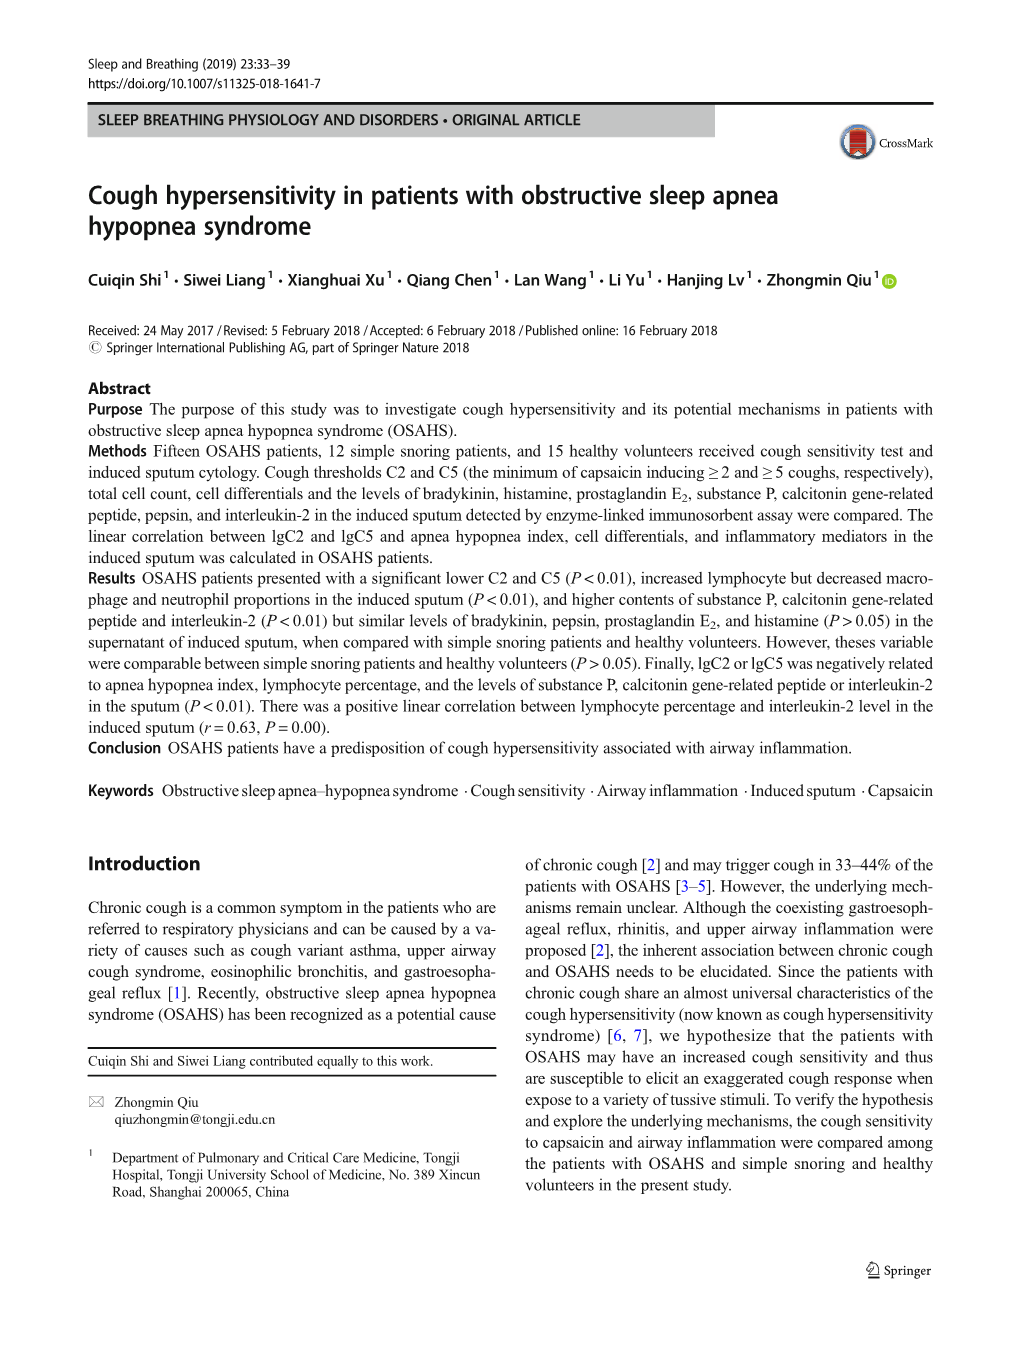 Cough Hypersensitivity in Patients with Obstructive Sleep Apnea Hypopnea Syndrome